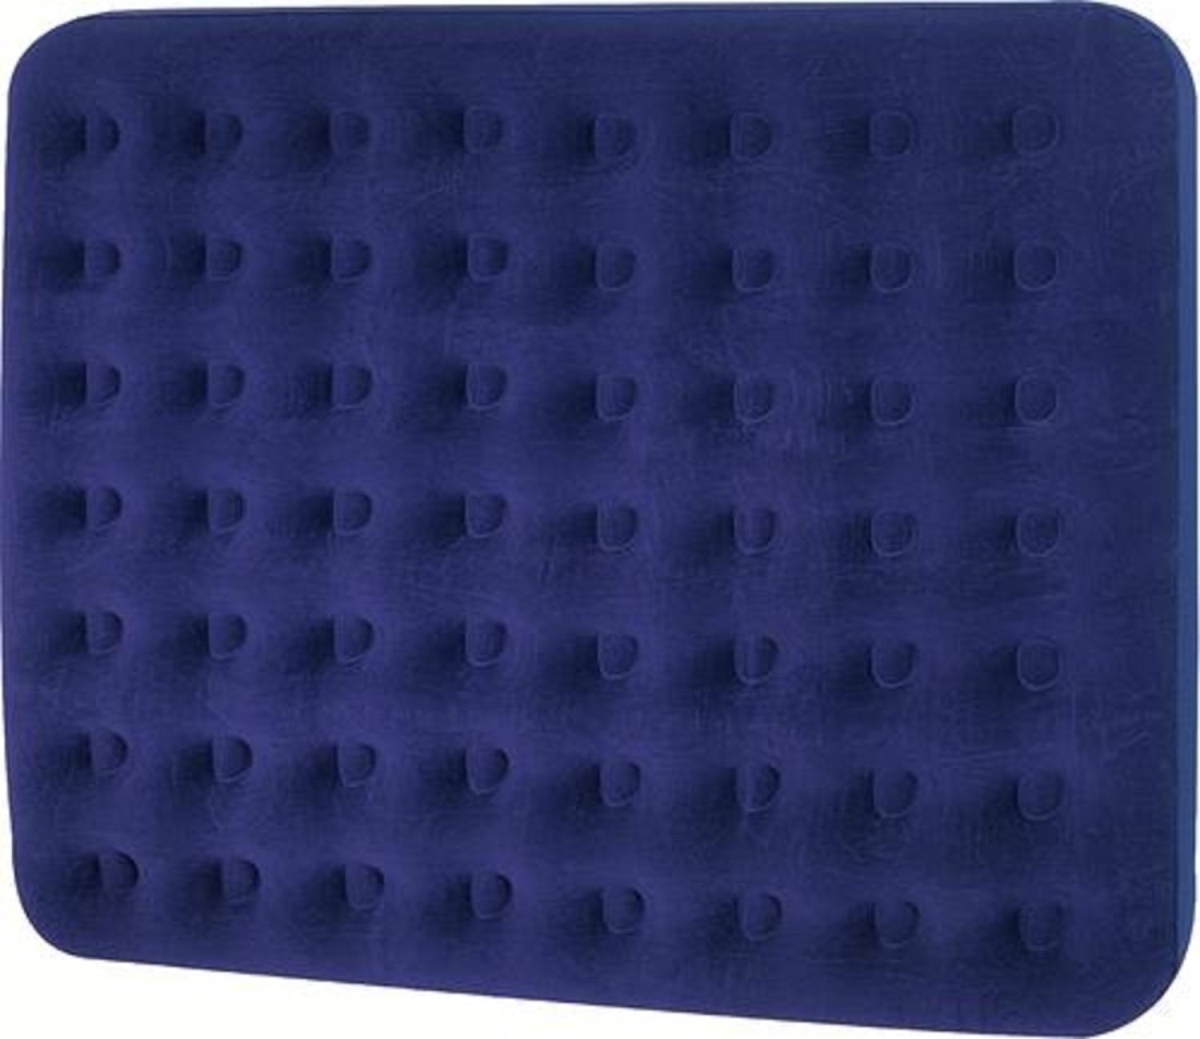 32588767 80 In. Navy Blue King Sized Indoor & Outdoor Inflatable Guest Air Bed Mattress